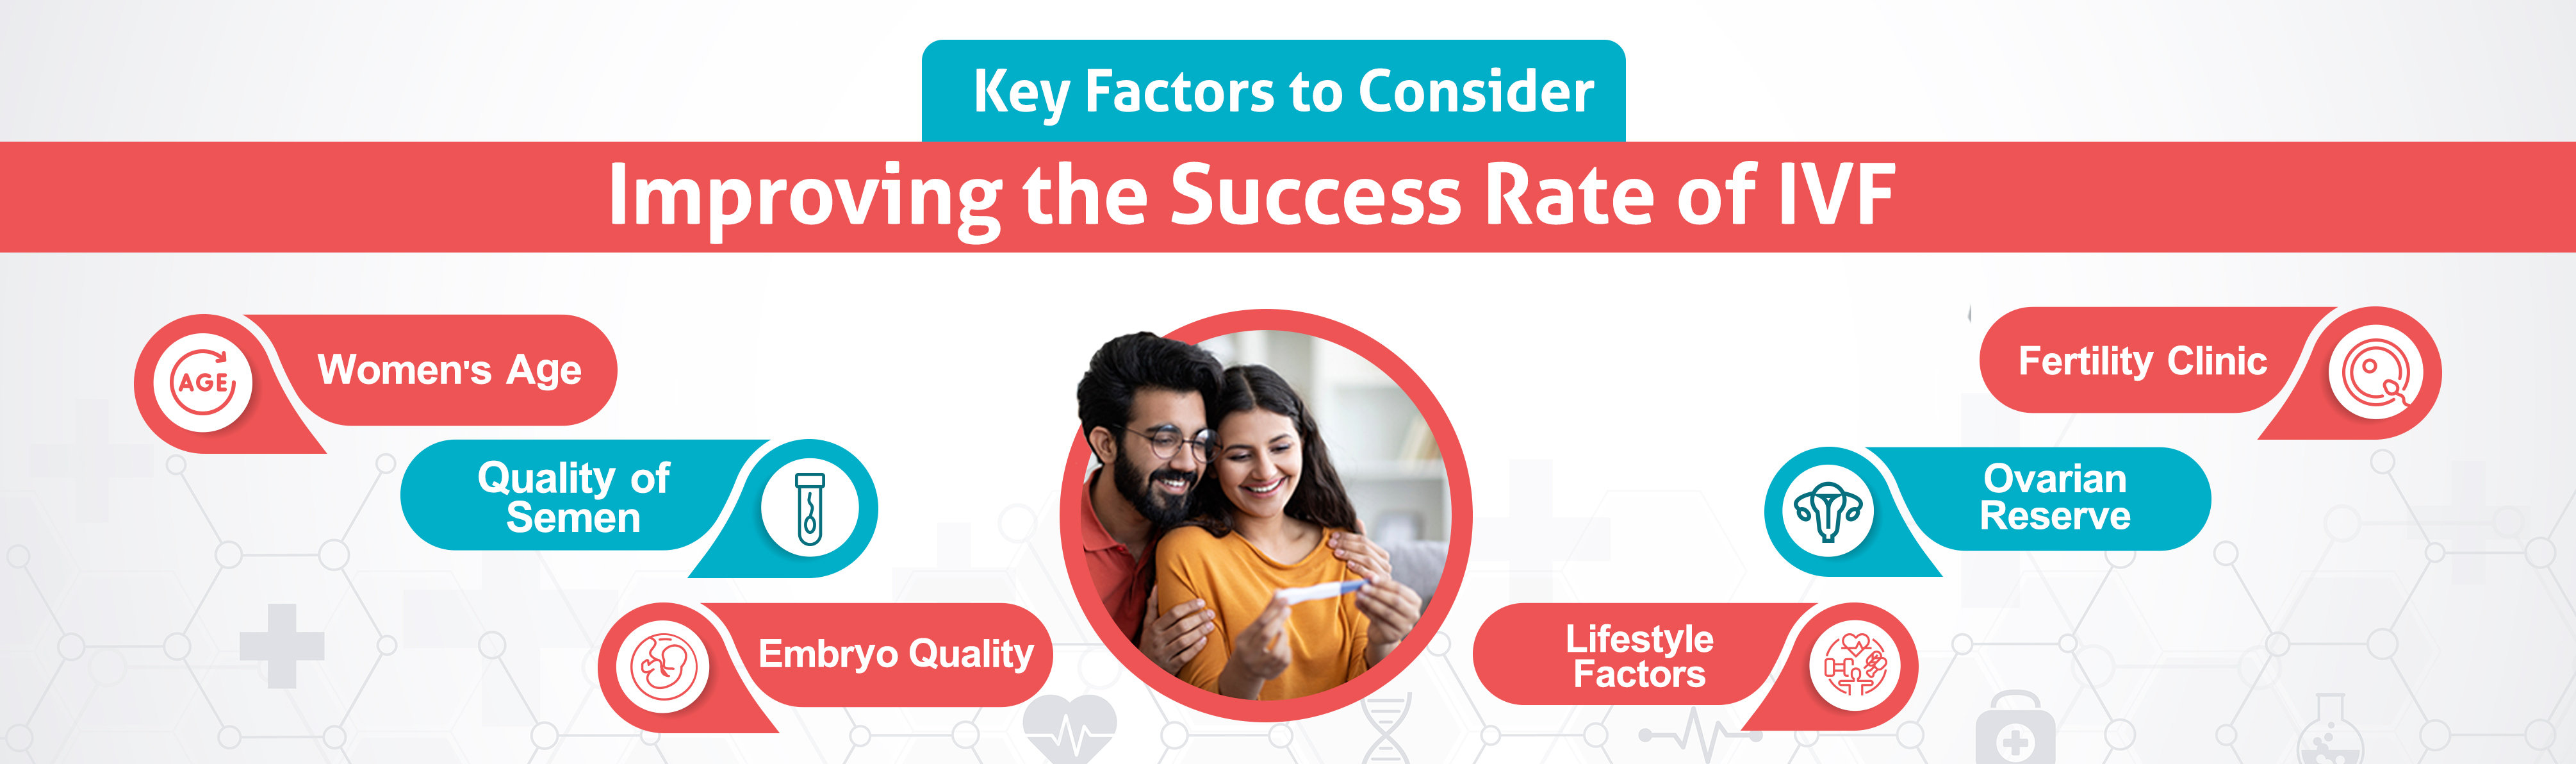 key factors to higher ivf success rate